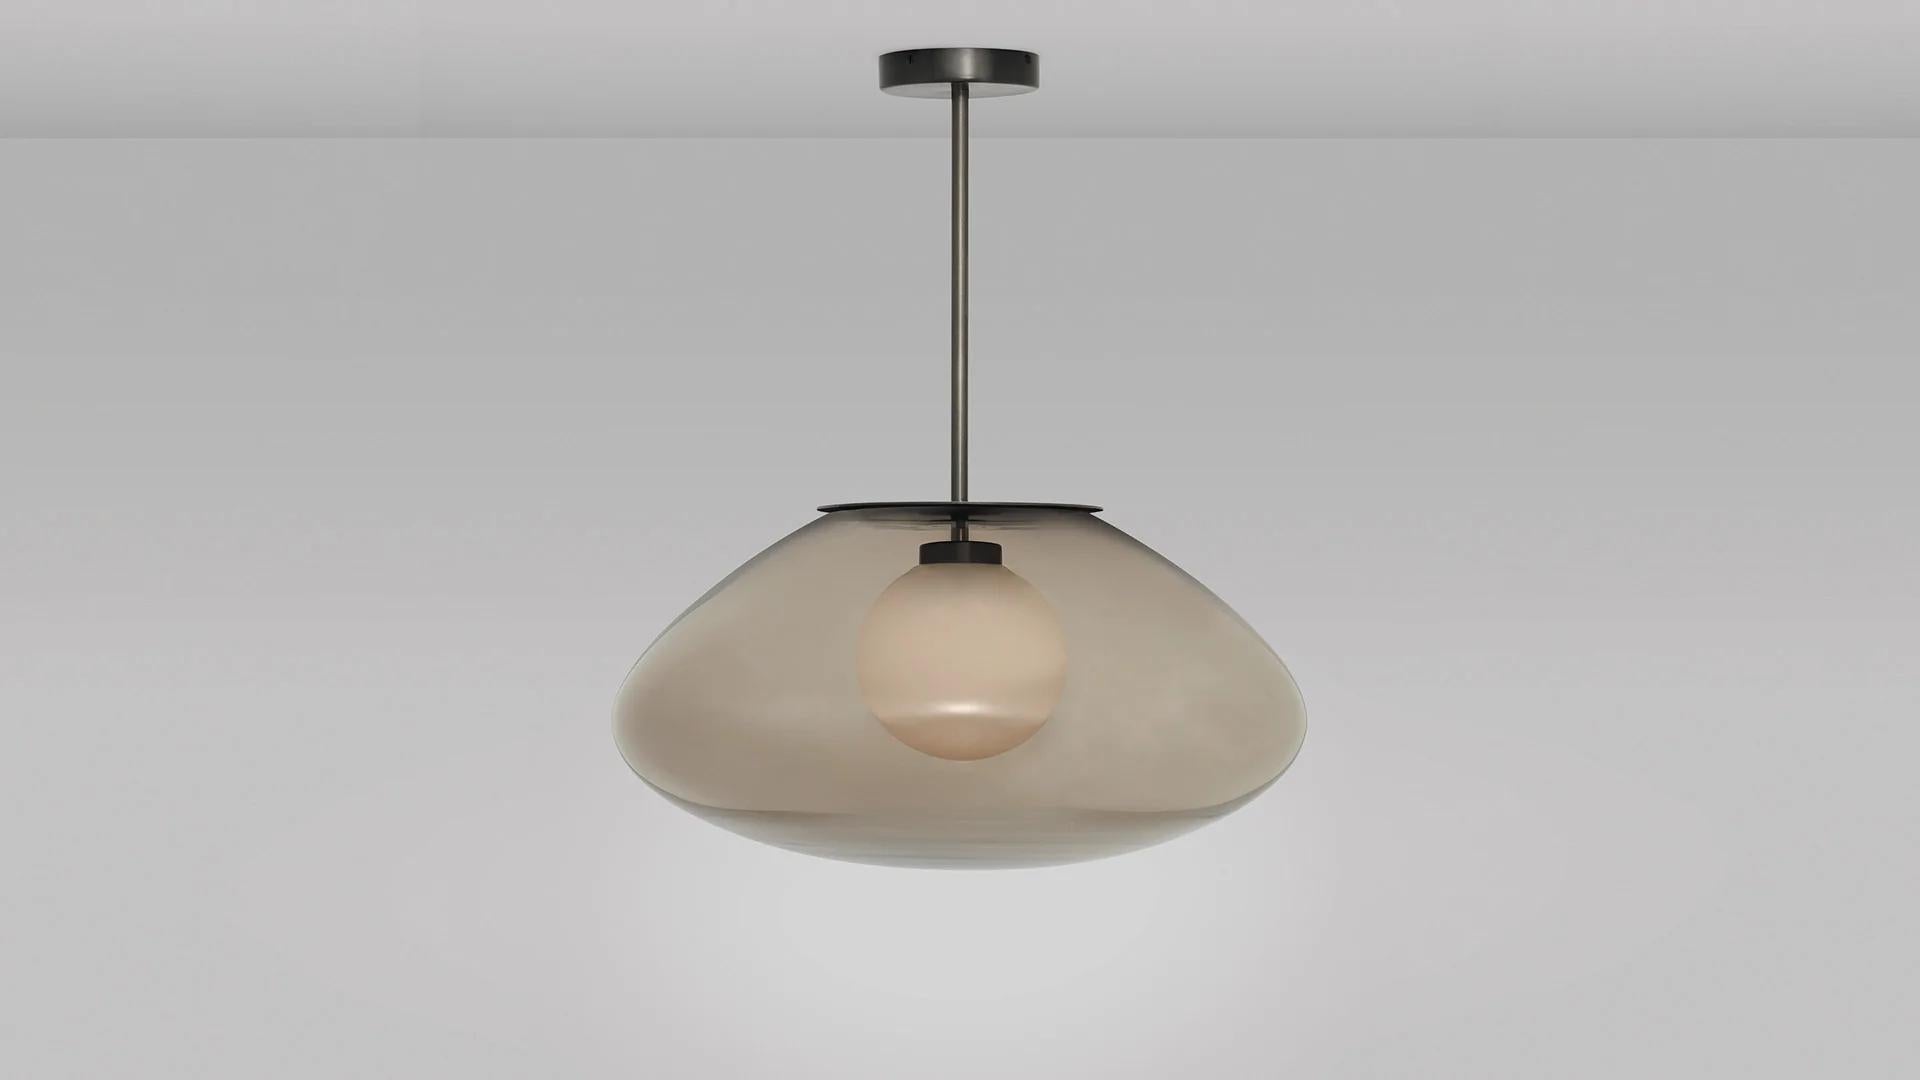 Petra large pendant by CTO Lighting.
Materials: dark bronze brass with smoked glass shade and white opal glass inner shade.
Also available in satin with smoked glass shade and hand shaped smoked glass inner shade,
satin brass with smoked glass